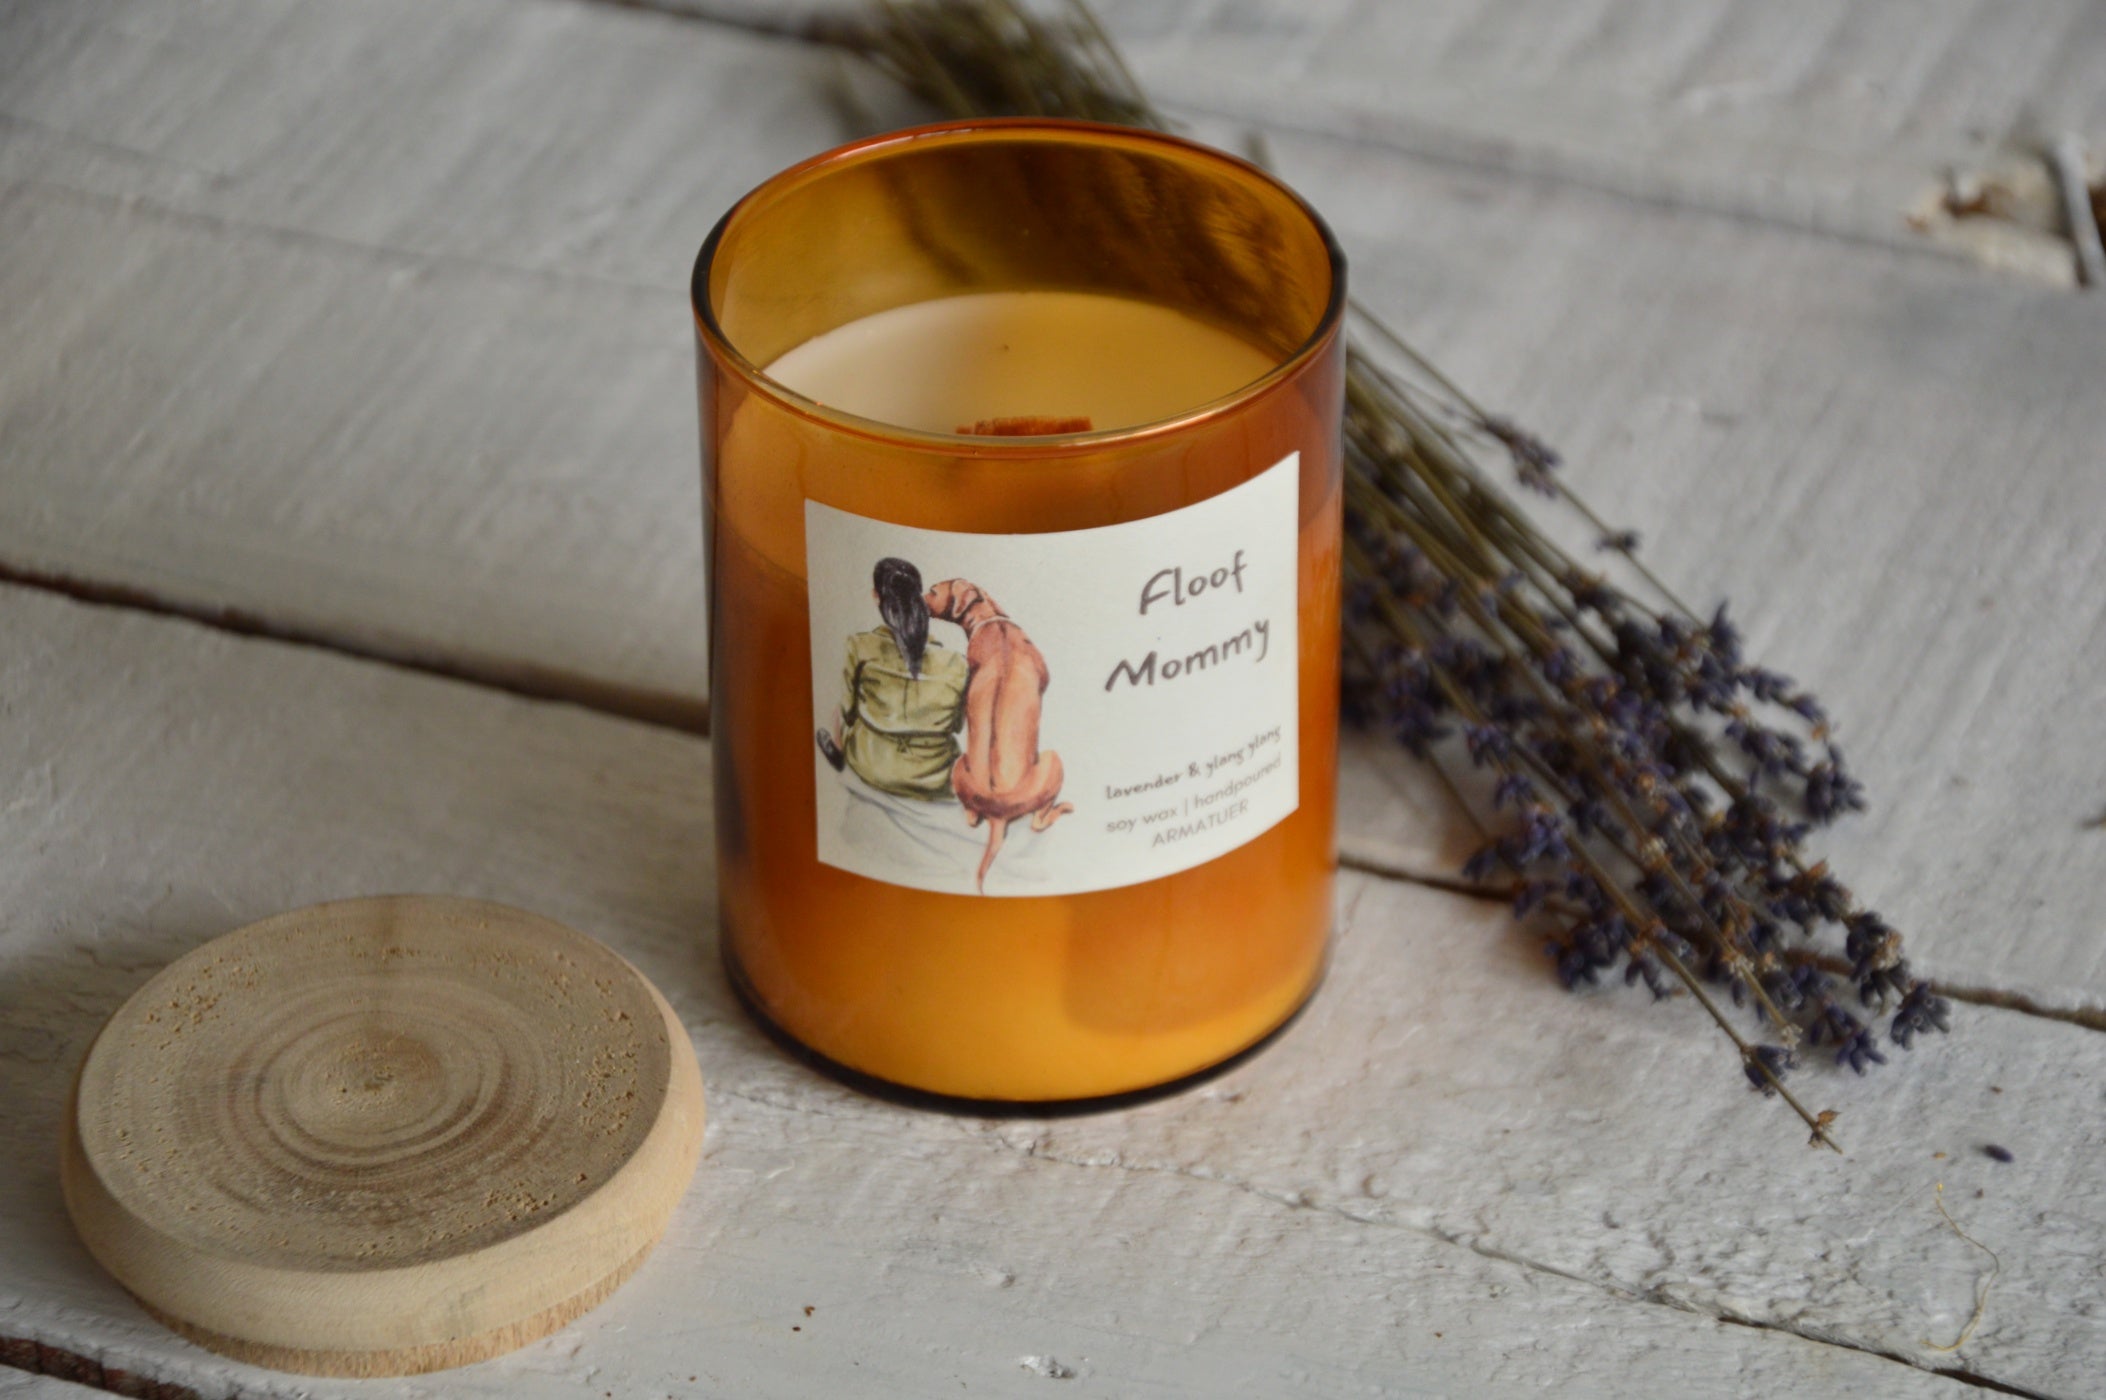 Floof Mommy Woodwick Candle | Mother's Day Gifts